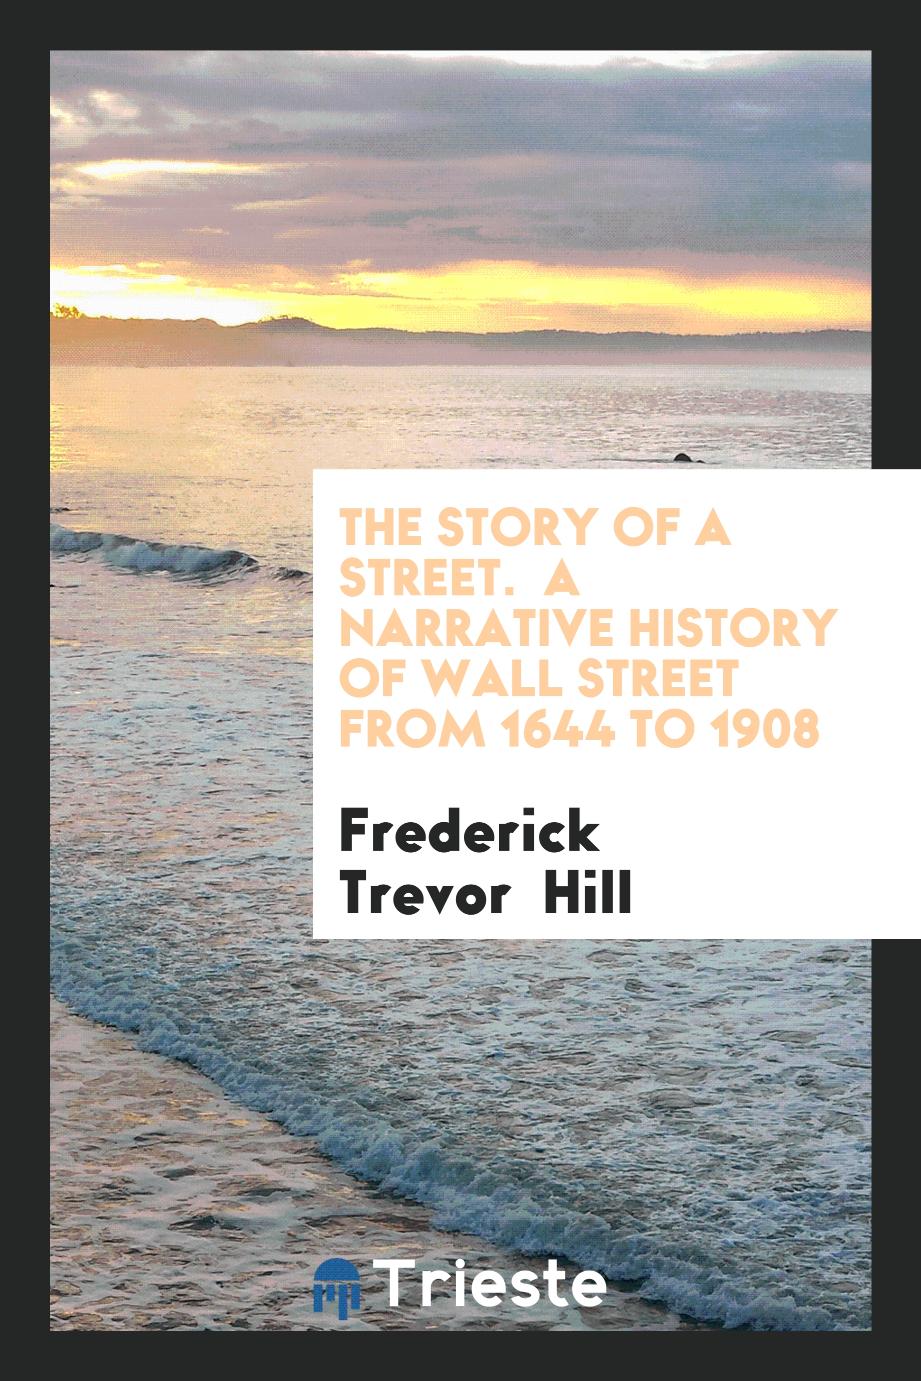 The Story of a Street. A Narrative History of Wall Street from 1644 to 1908